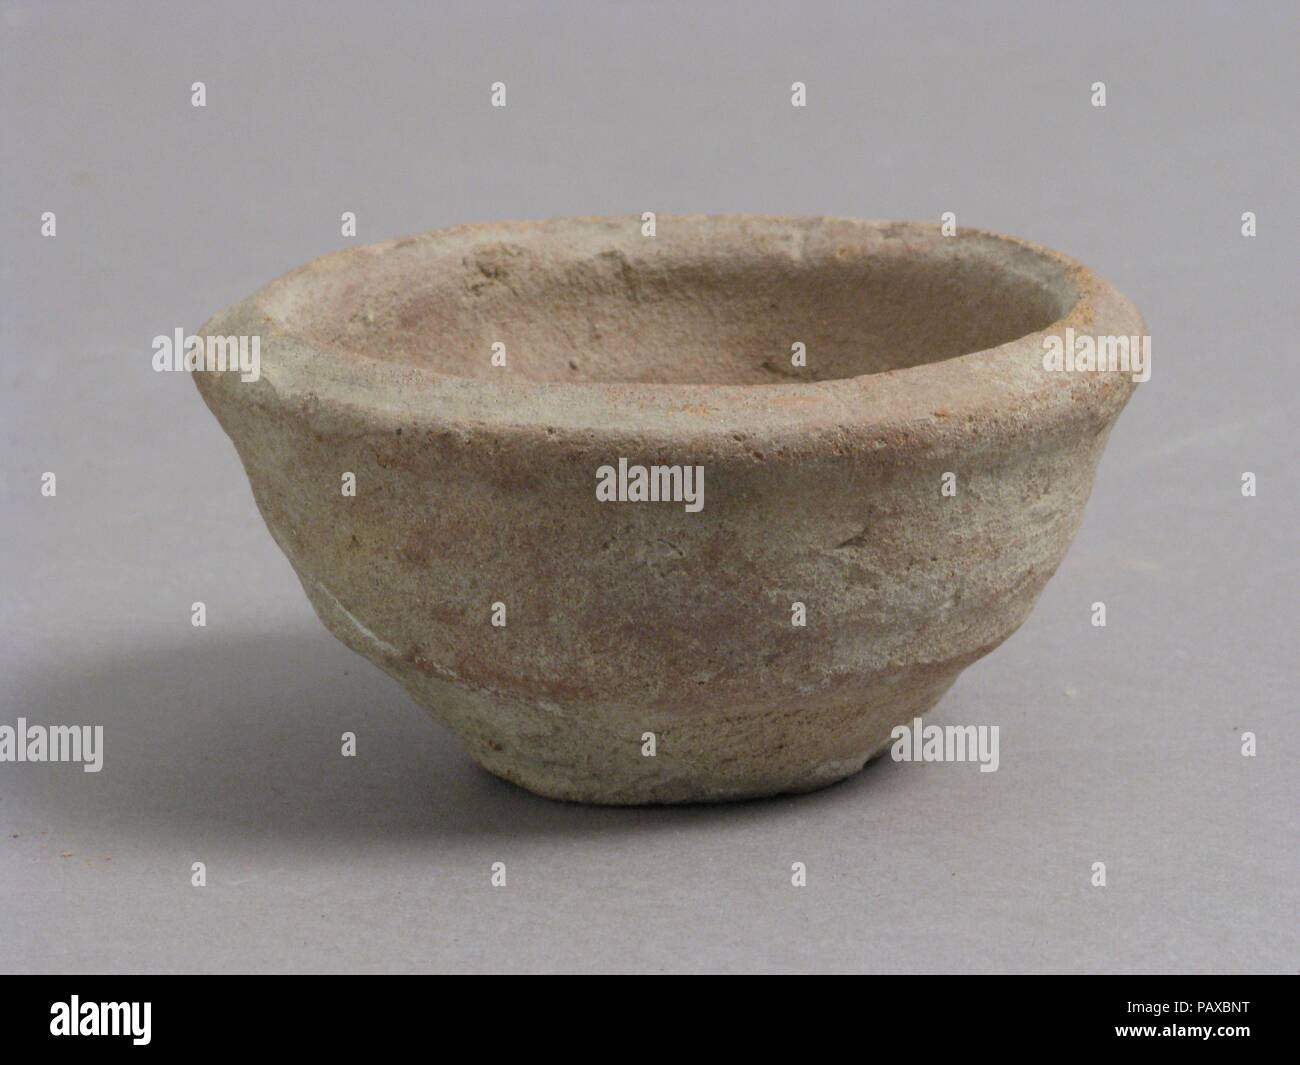 Bowl. Culture: Coptic. Dimensions: Overall: 1 9/16 x 3 in. (3.9 x 7.6 cm). Date: 4th-7th century. Museum: Metropolitan Museum of Art, New York, USA. Stock Photo